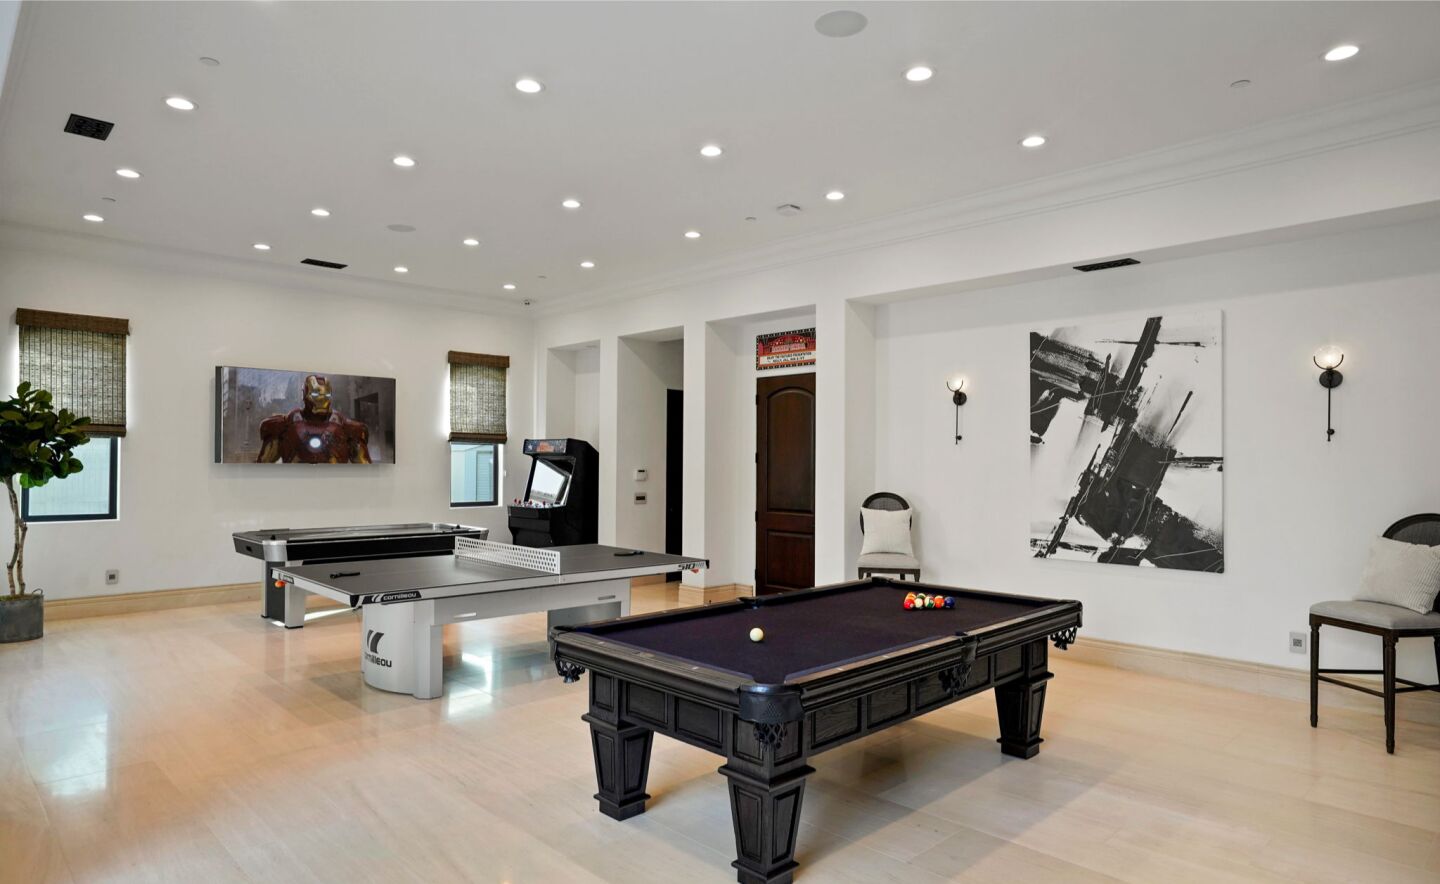 The game room.